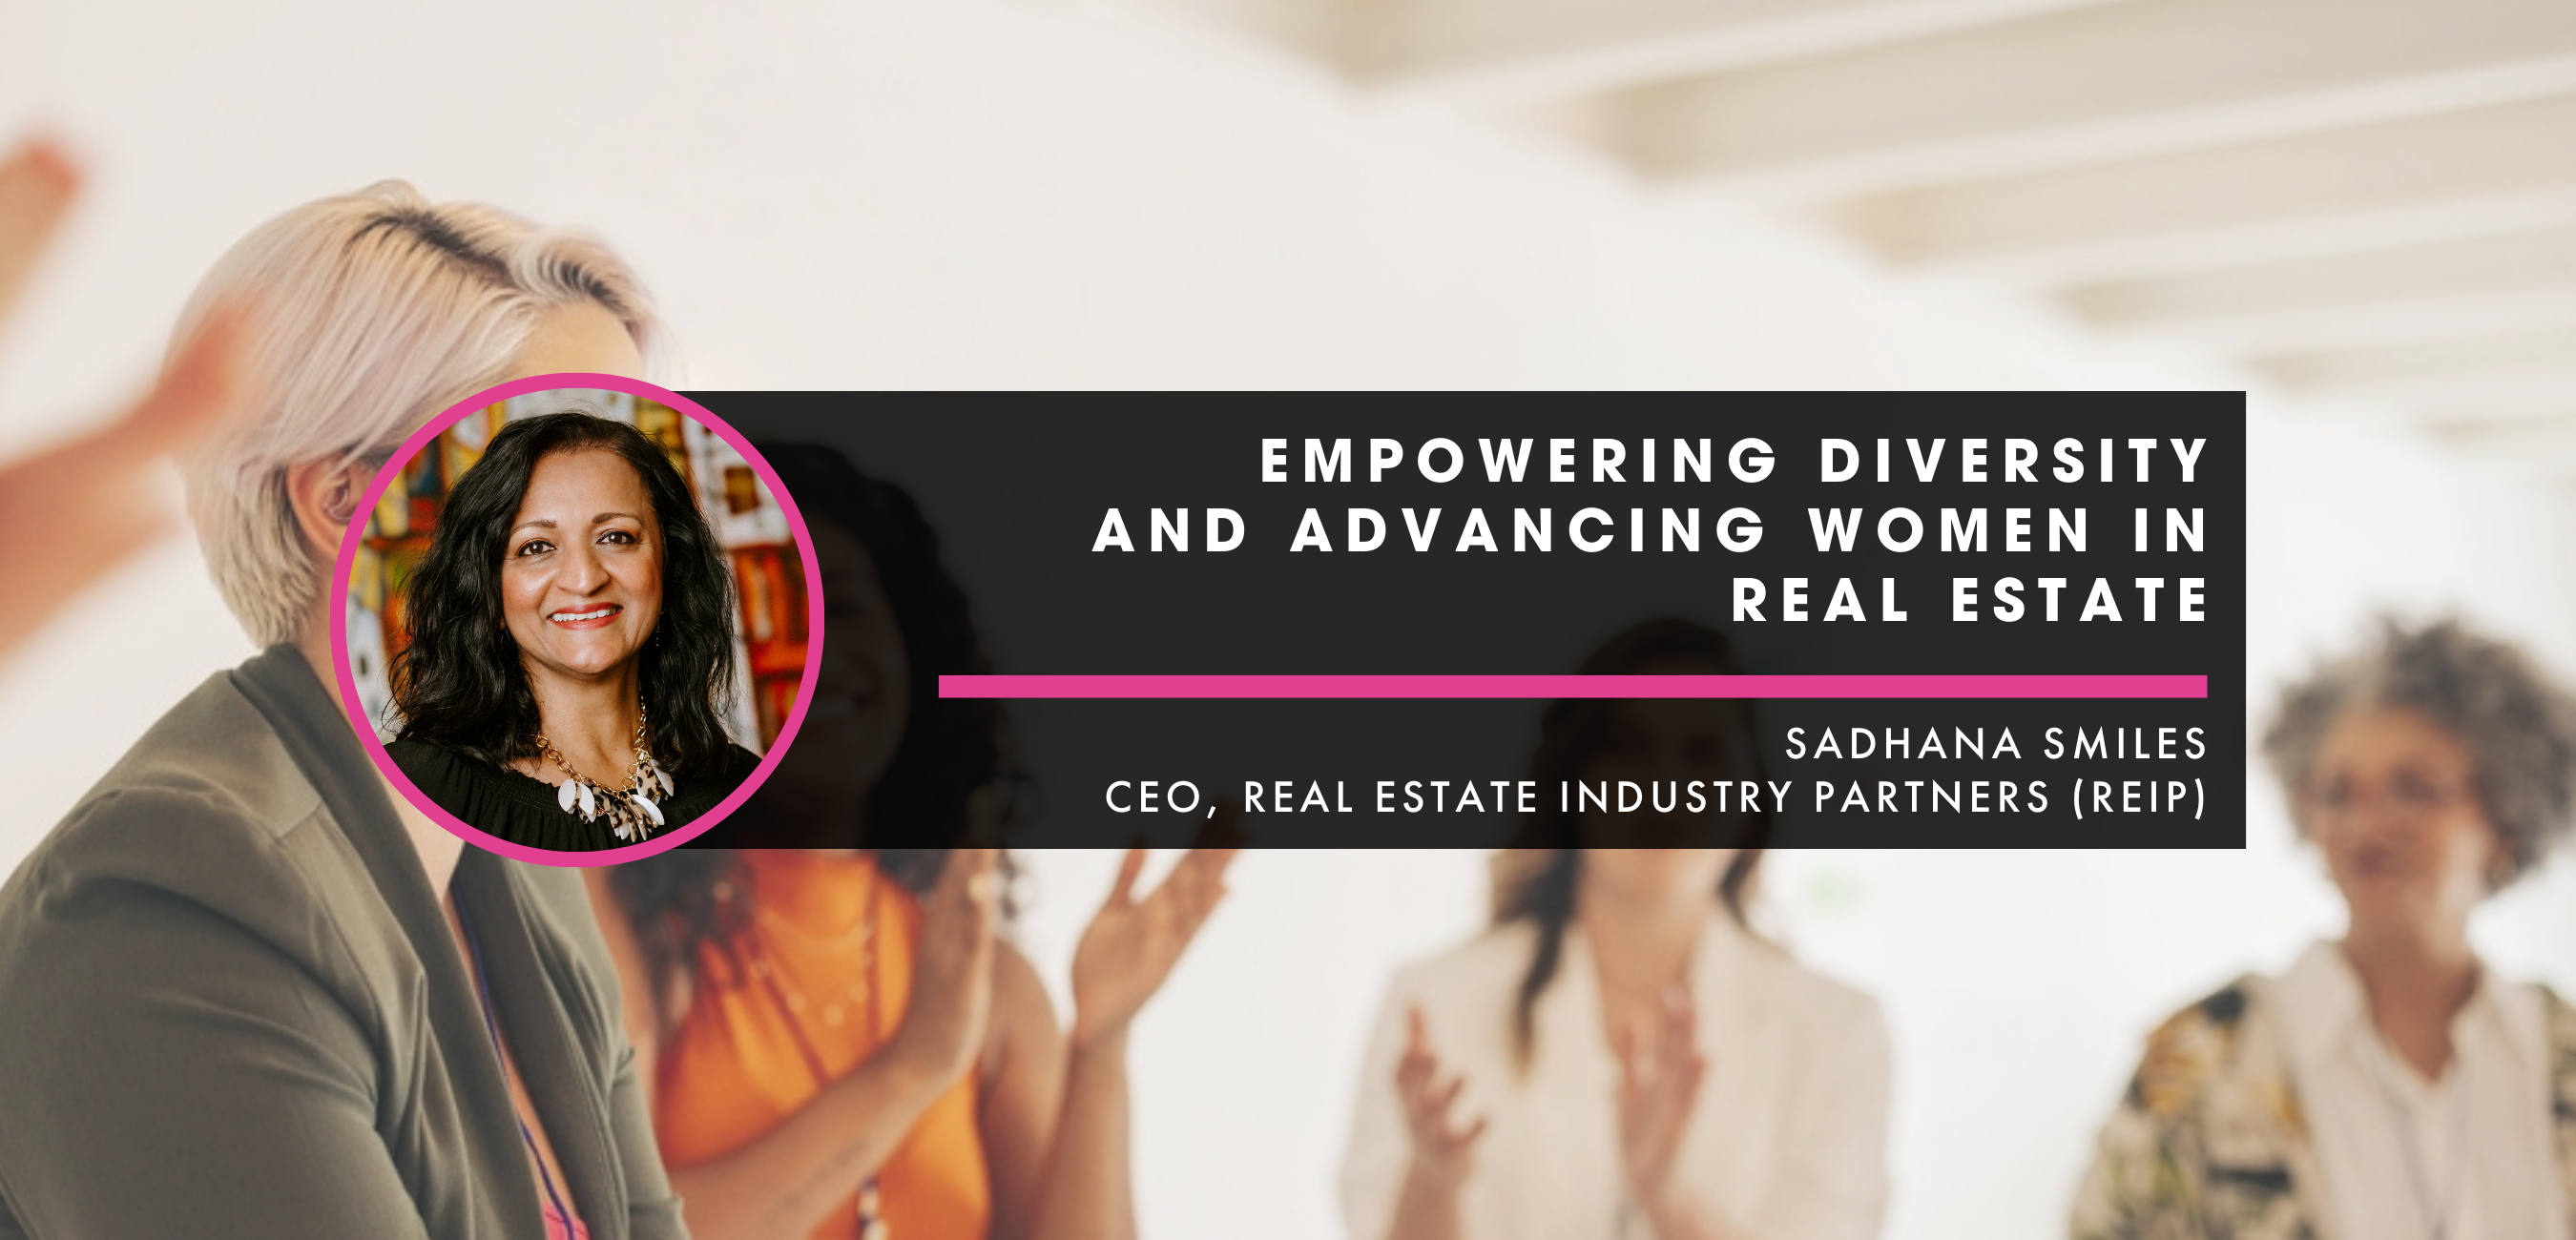 Empowering Diversity and Advancing Women in Real Estate: An Interview with Sadhana Smiles